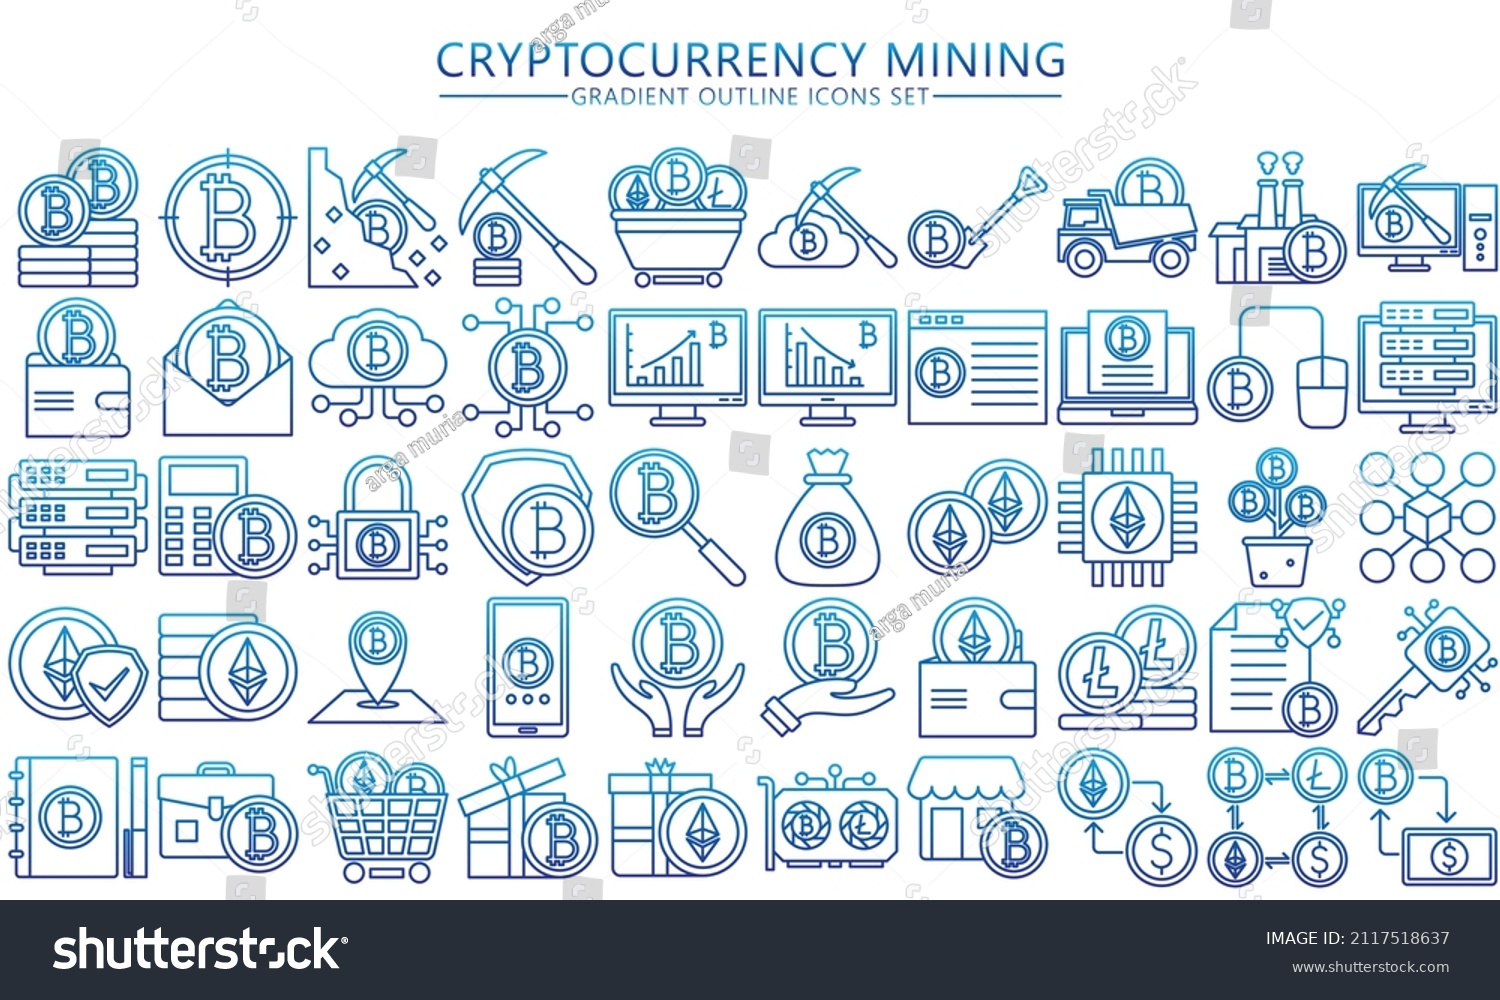 SVG of Cryptocurrency mining gradient outline icon set. bitcoin ethereum, fintech pictograms for web and mobile app GUI. Blockchain technology simple UI, UX vector icons, EPS 10 ready convert to SVG svg